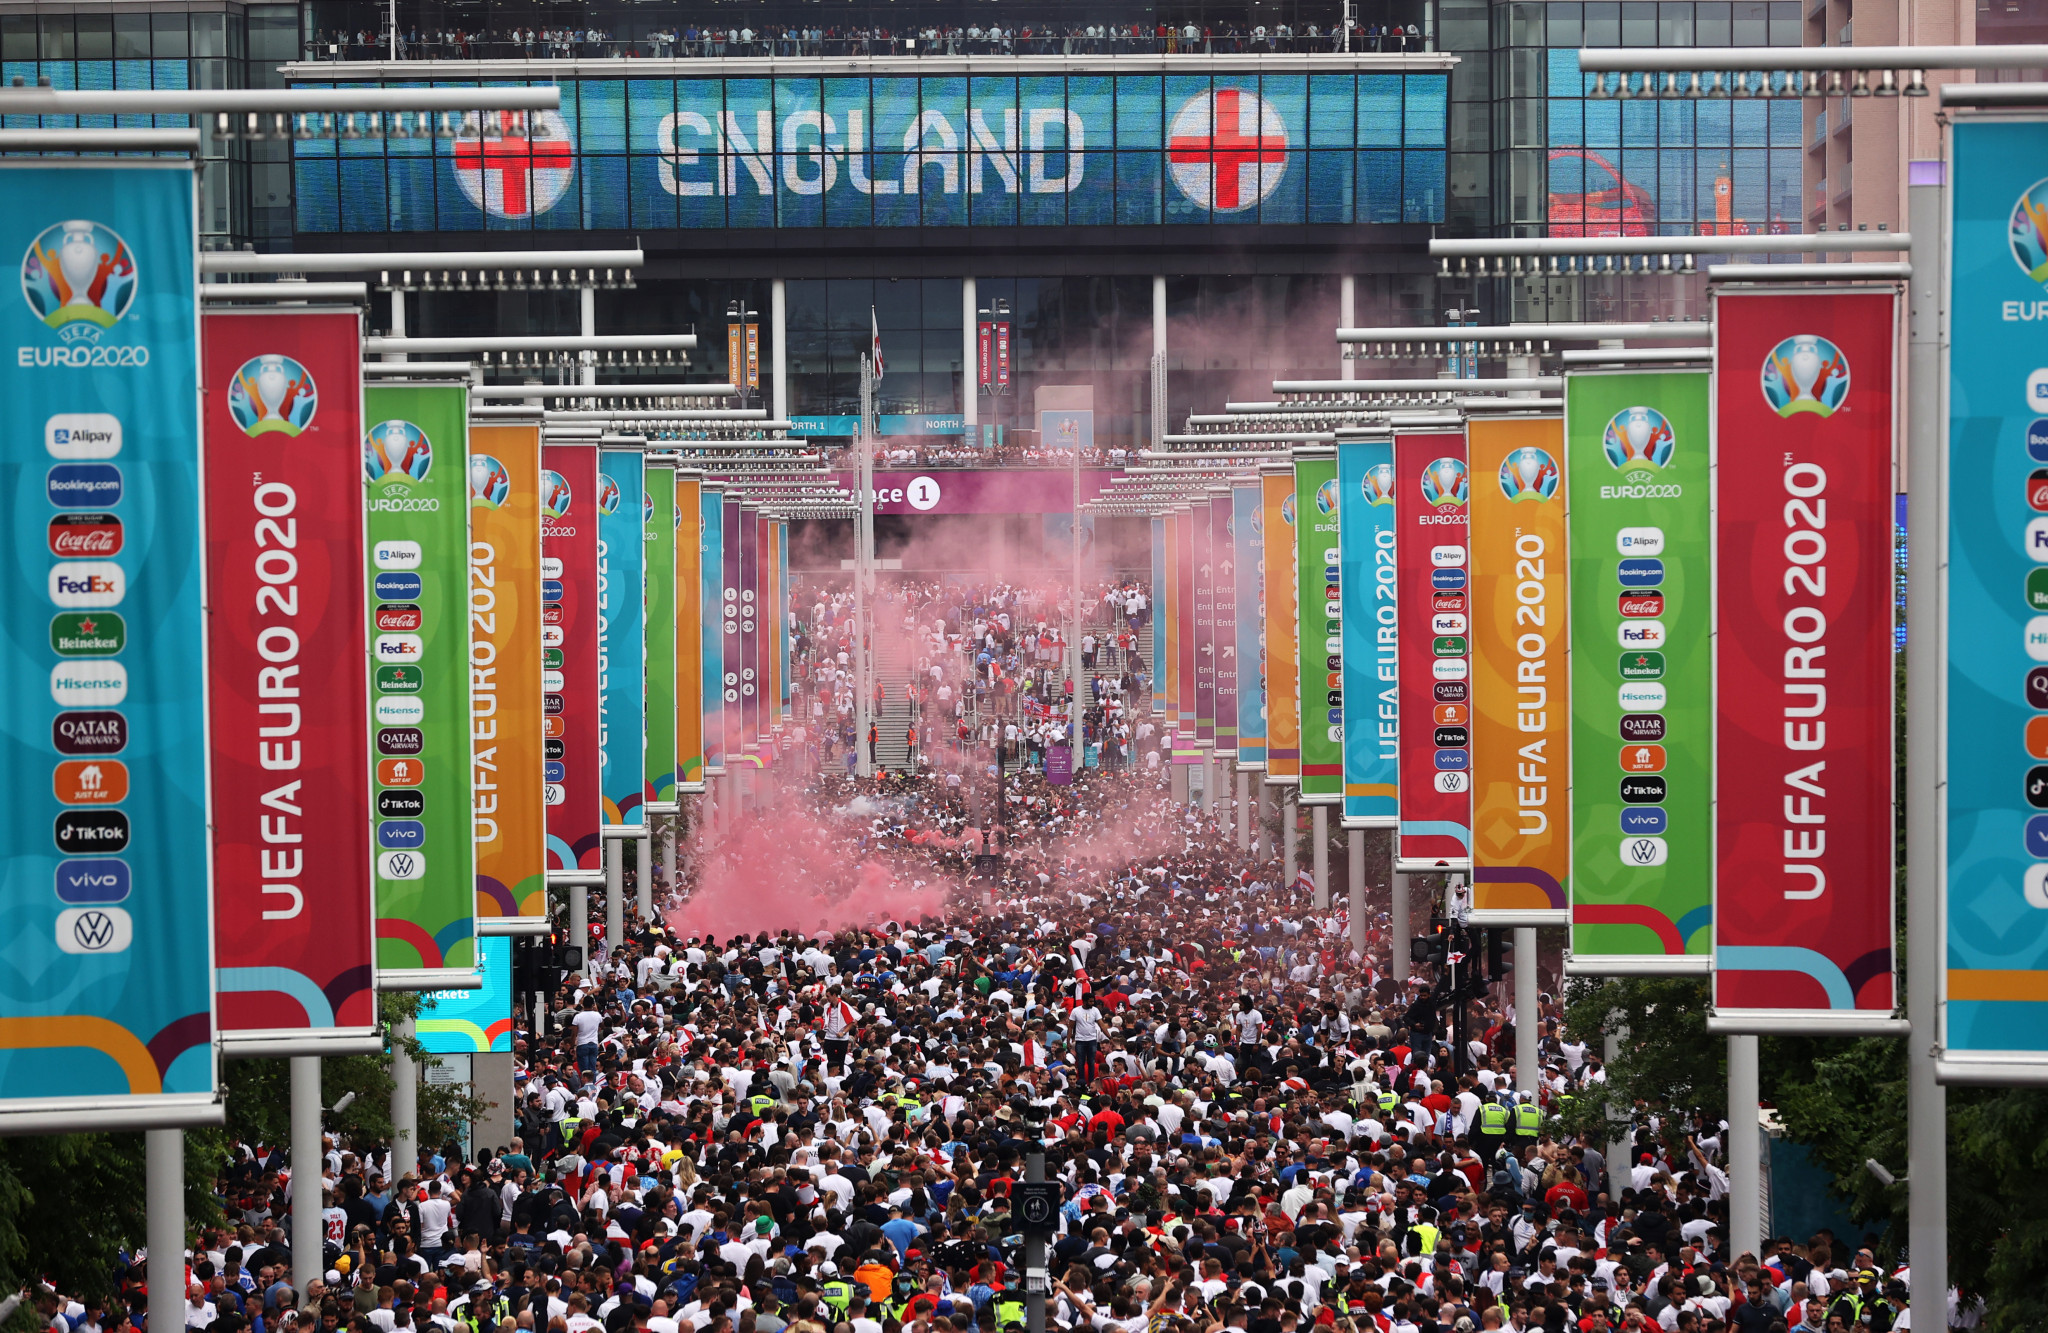 Wembley Stadium in London hosted the semi-finals and finals of Euro 2020 ©Getty Images